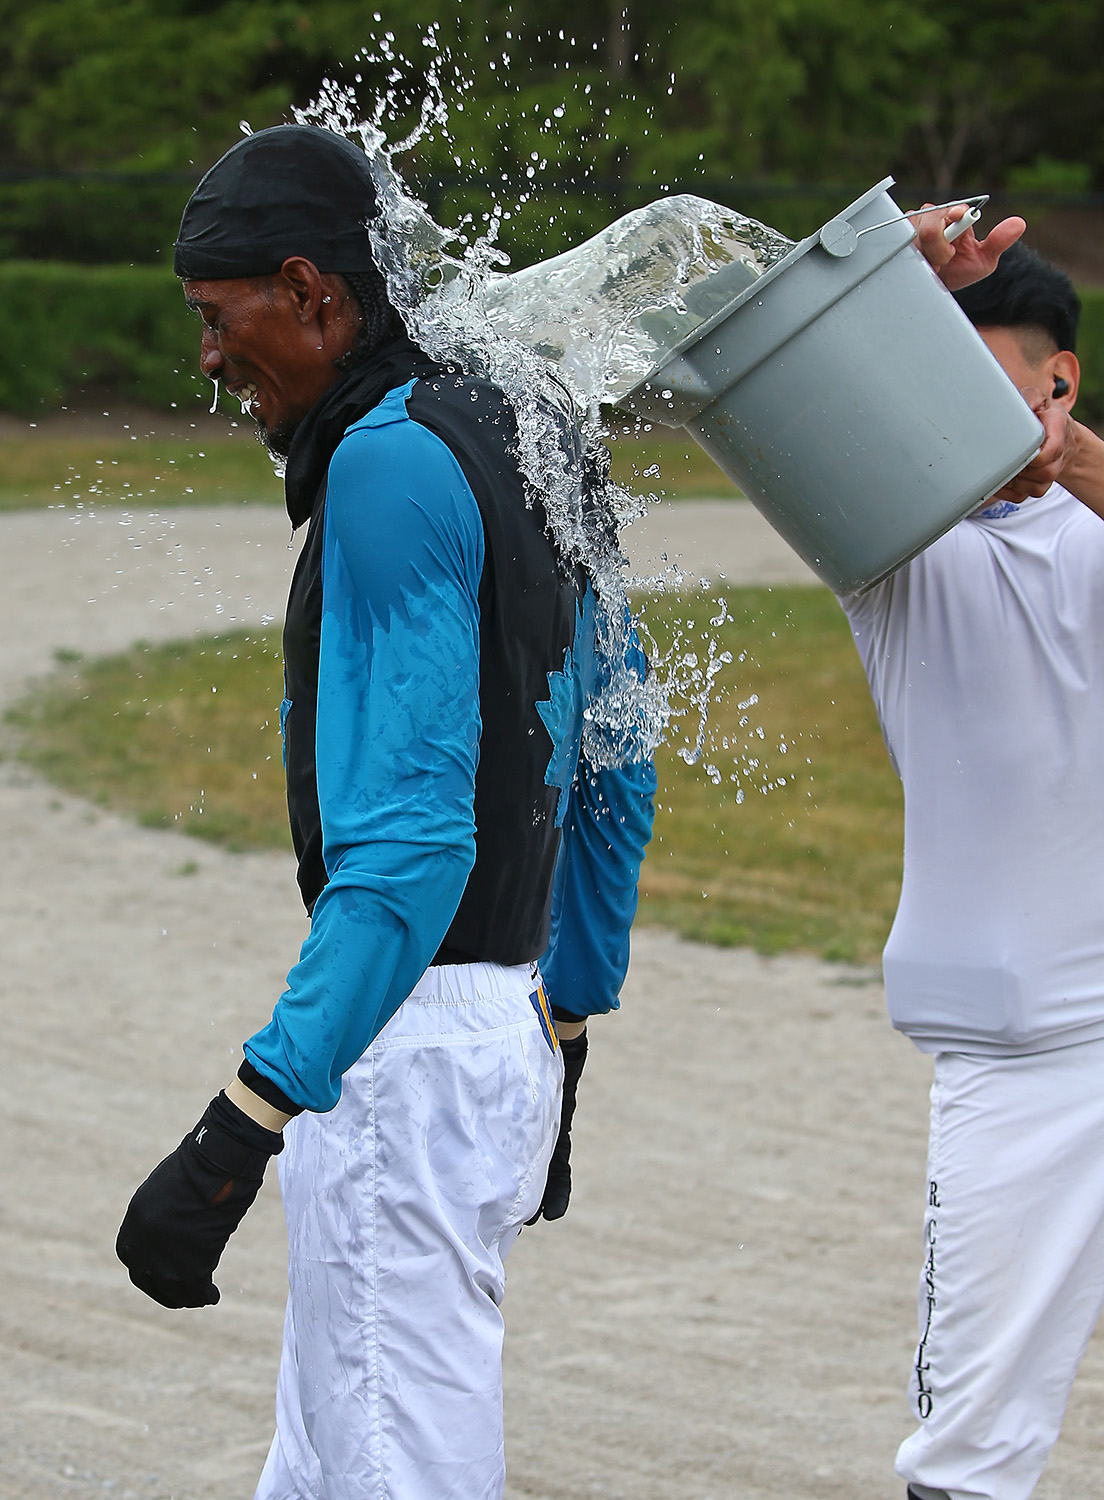 Jockey gets water dumped on him, which is tradition after first win.